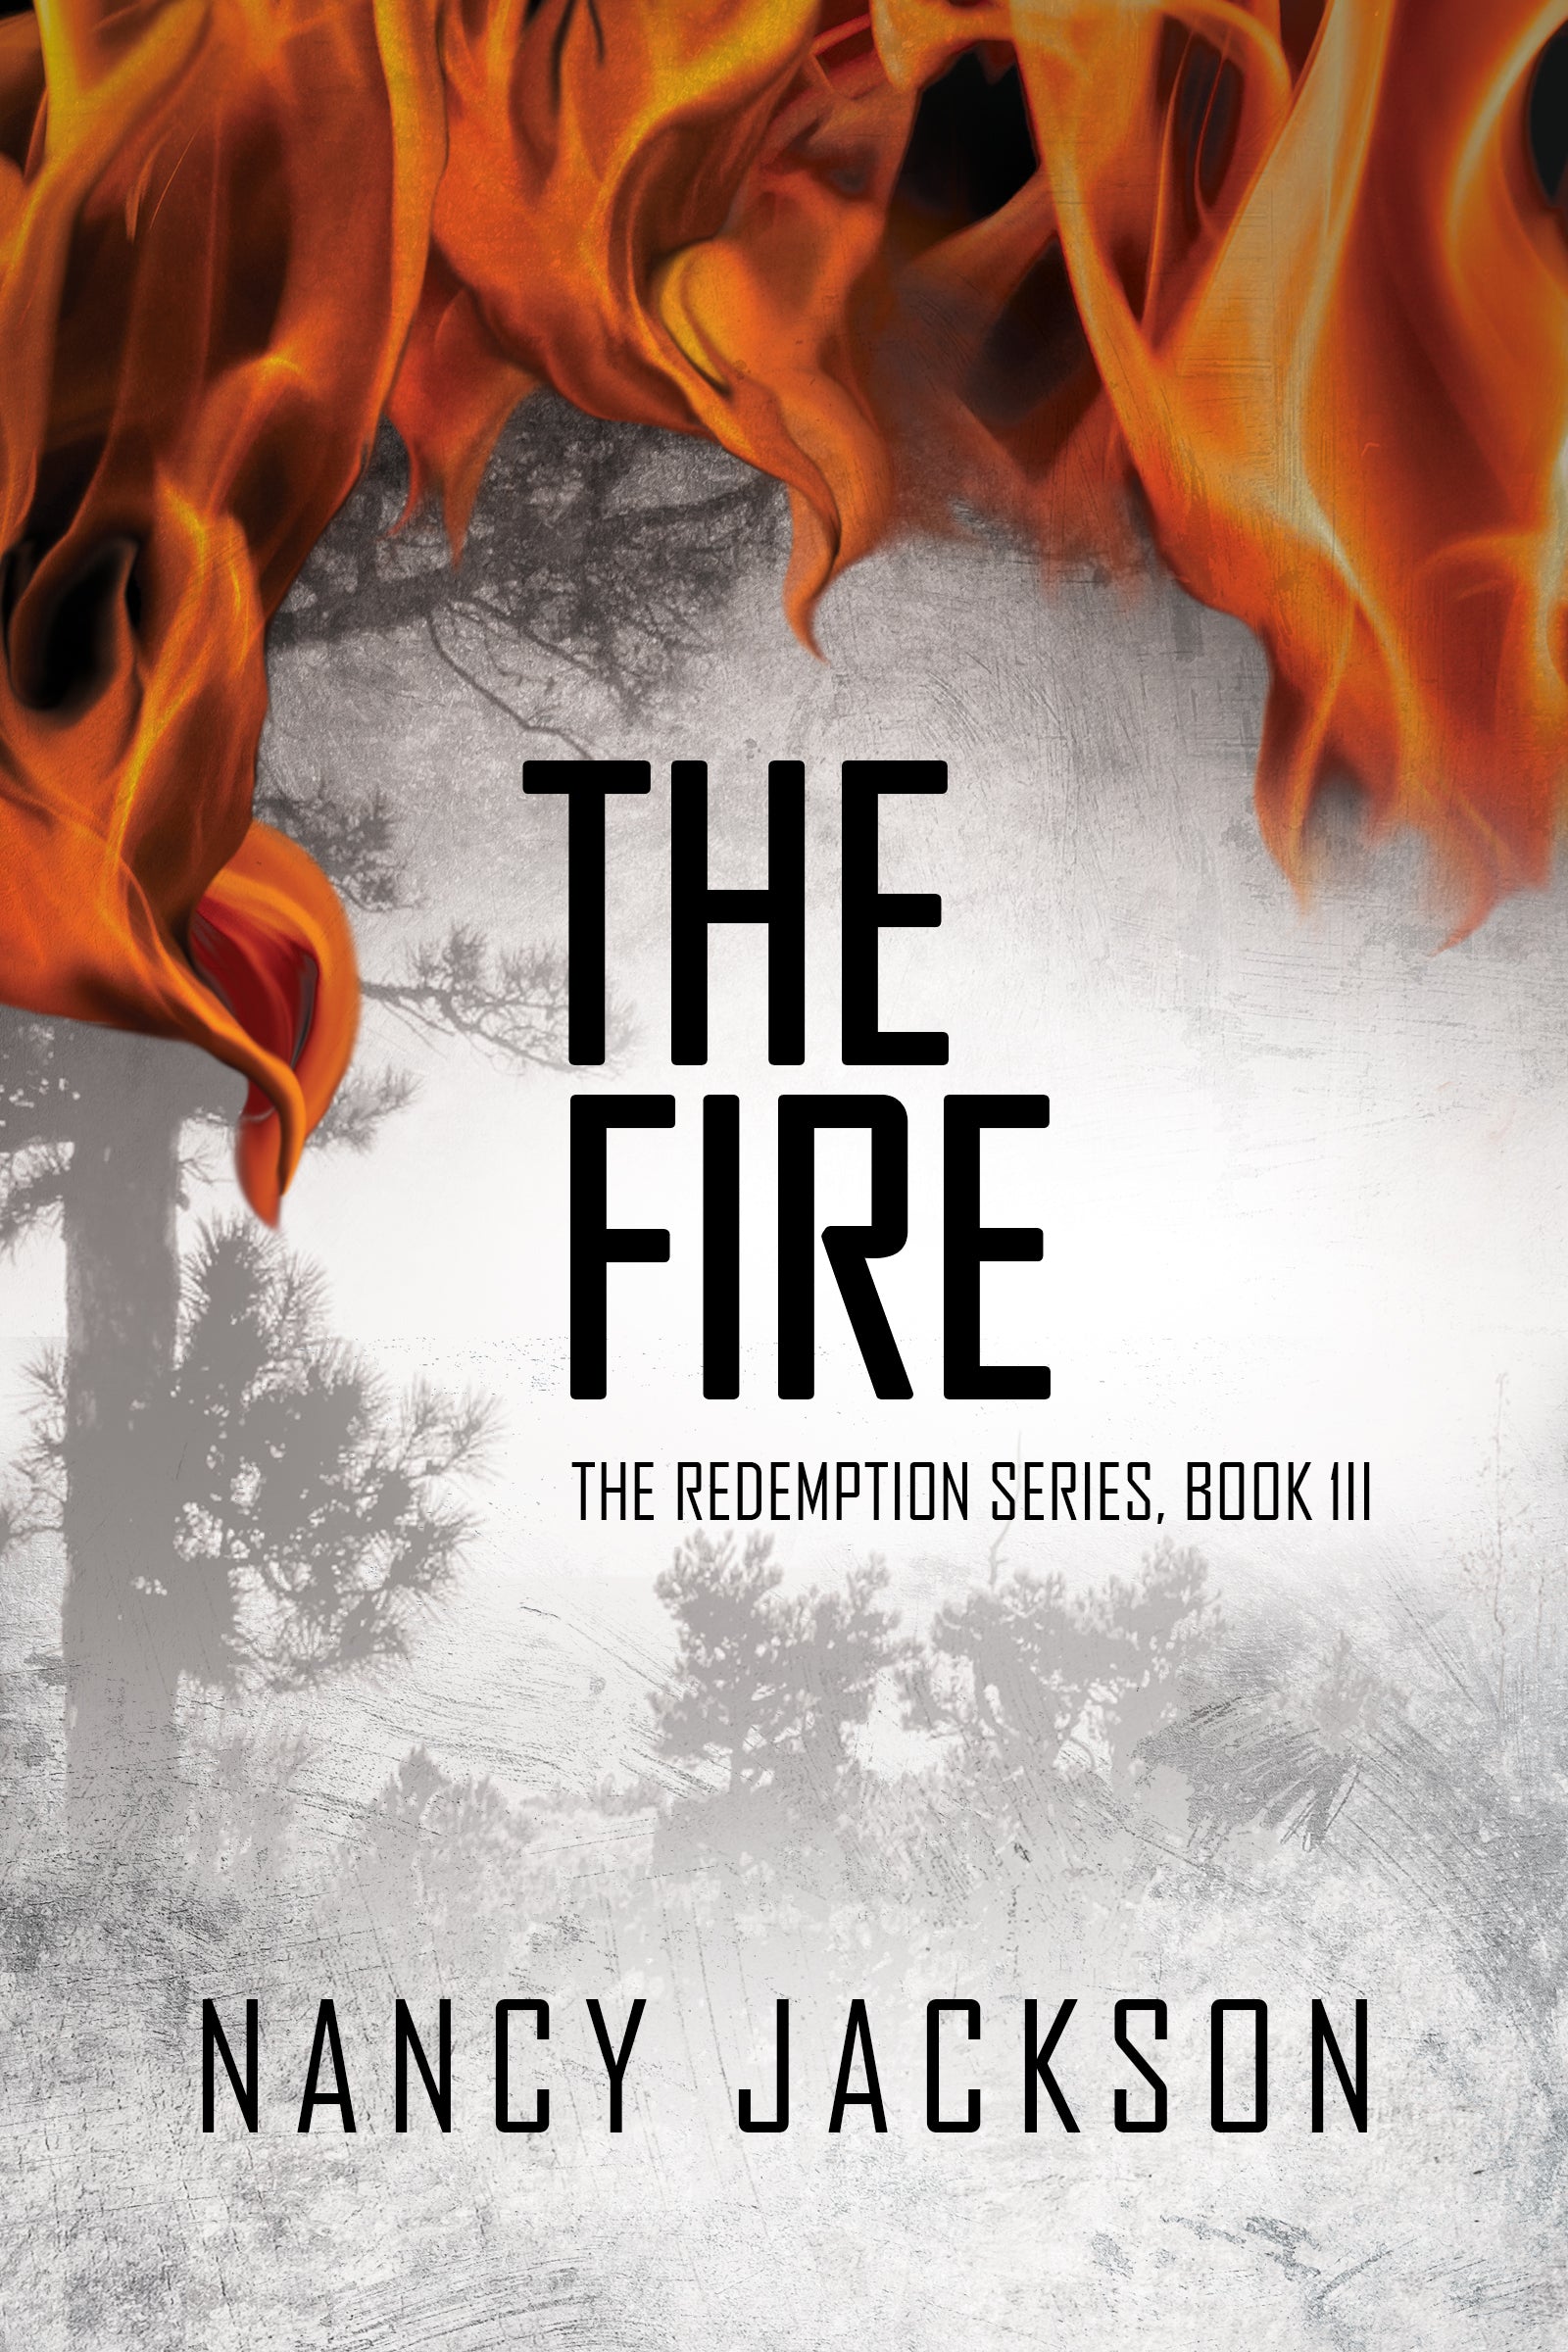 The Fire - Author Signed Soft Cover